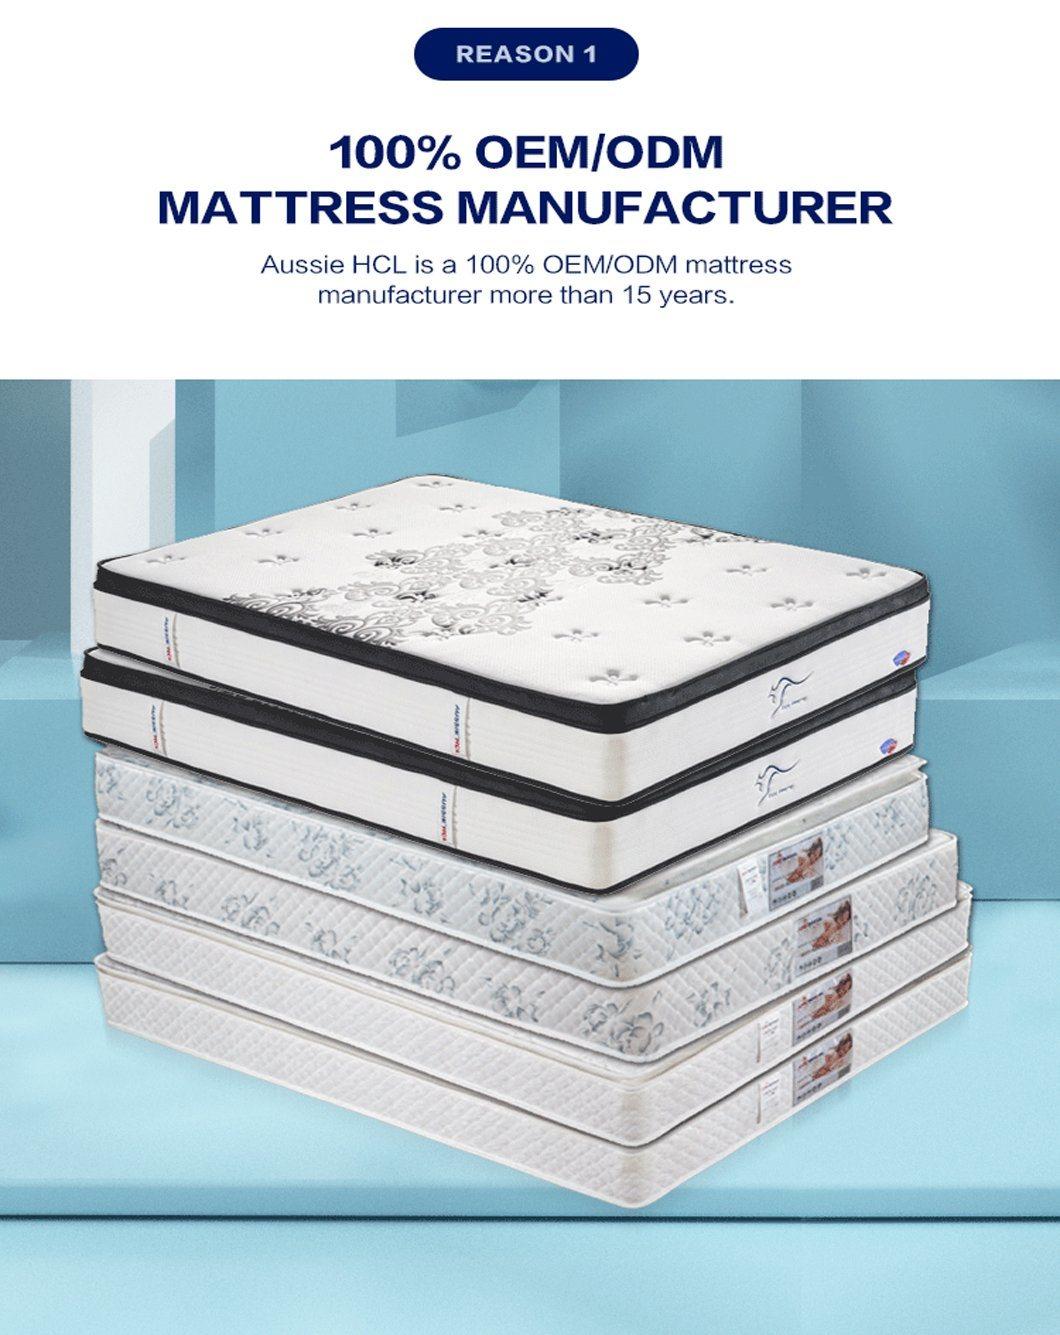 Quality Pressure Relief Cool Gel Memory Foam Hybrid Pocket Coil Spring Mattress in a Box